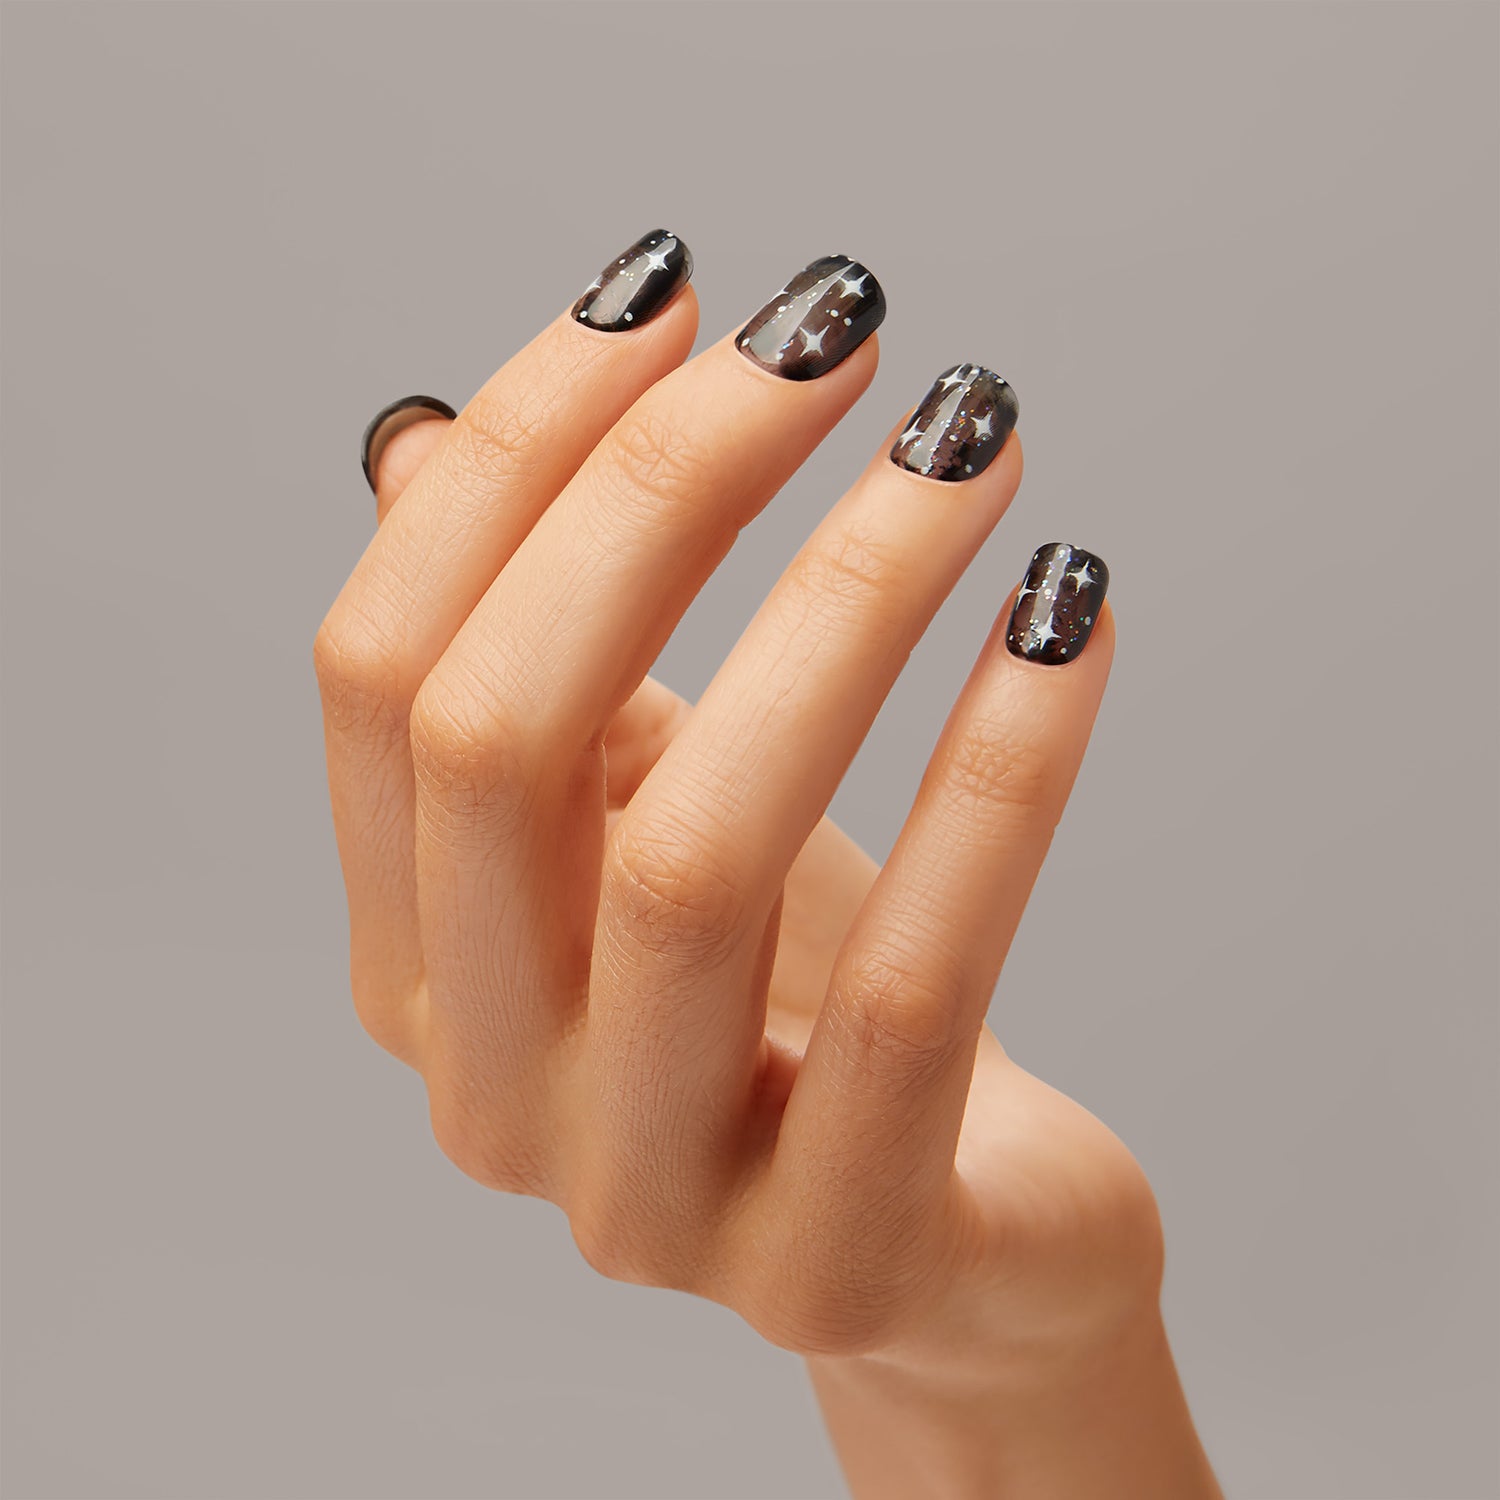  Wait for the smoke to clear and you'll see the magic. Short length, square shape, glossy finsh. Short press-on gel nails featuring smokey accents, airbrush stars, and iridescent glitter.